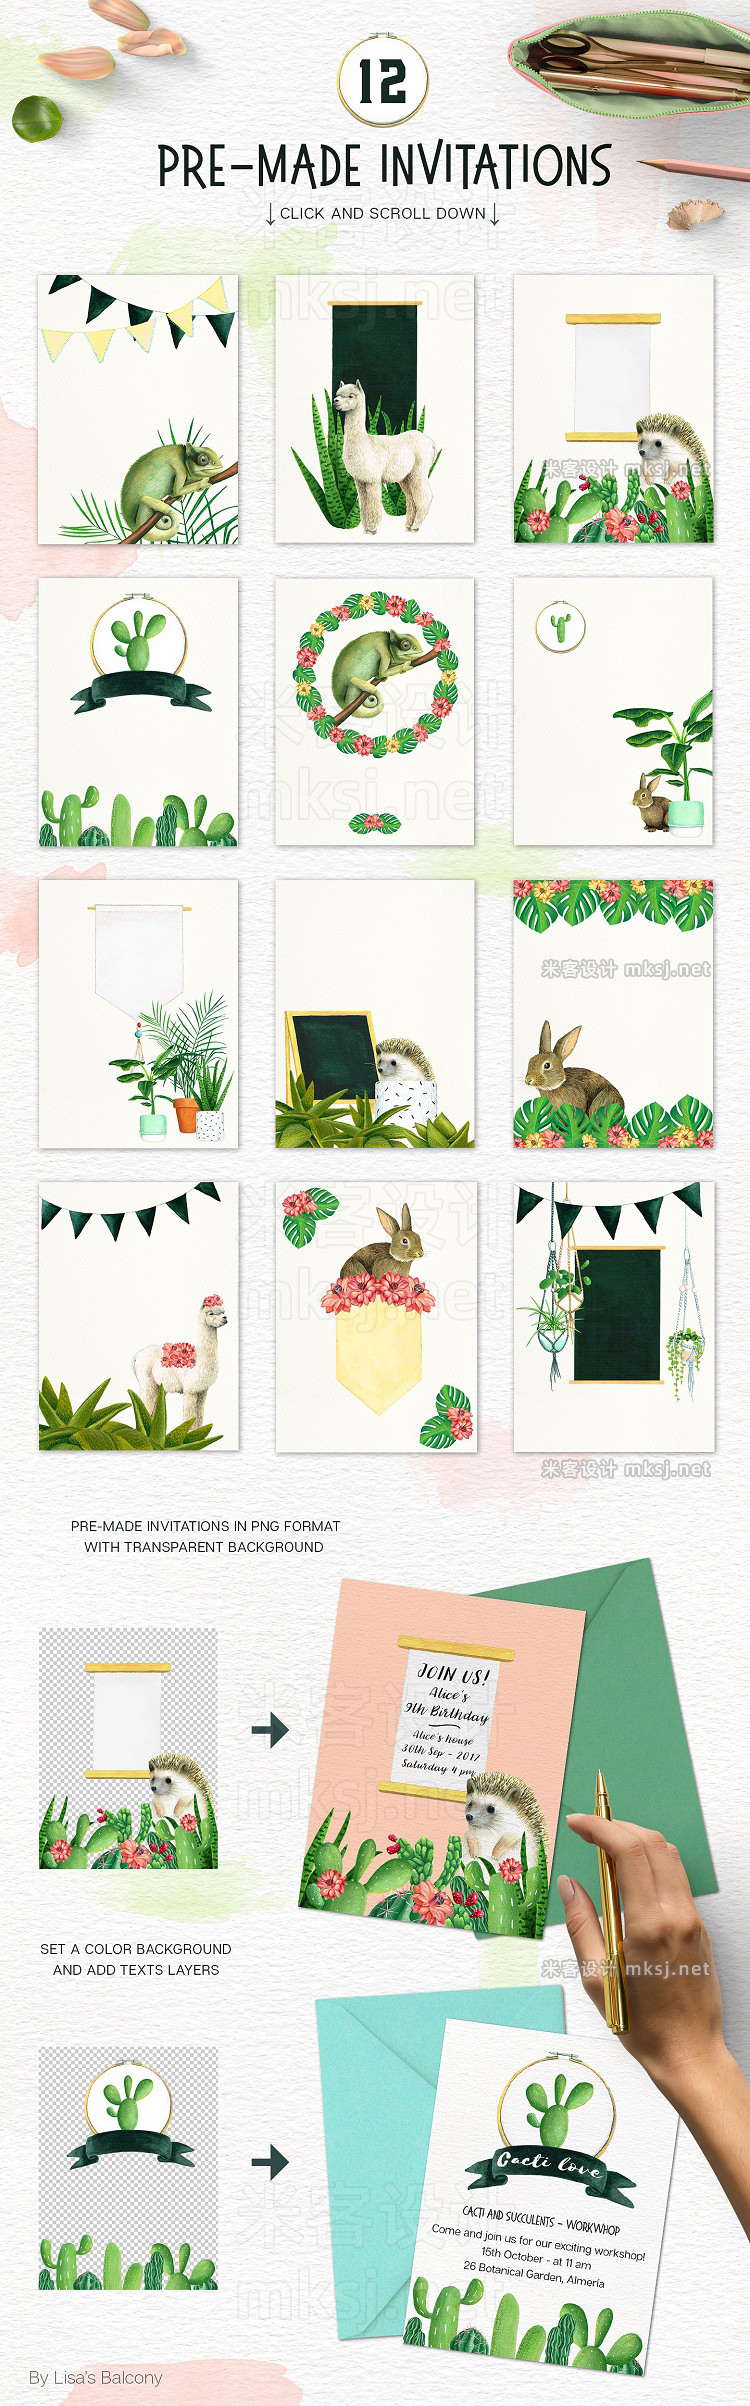 png素材 Cacti and Animals - Design Kit